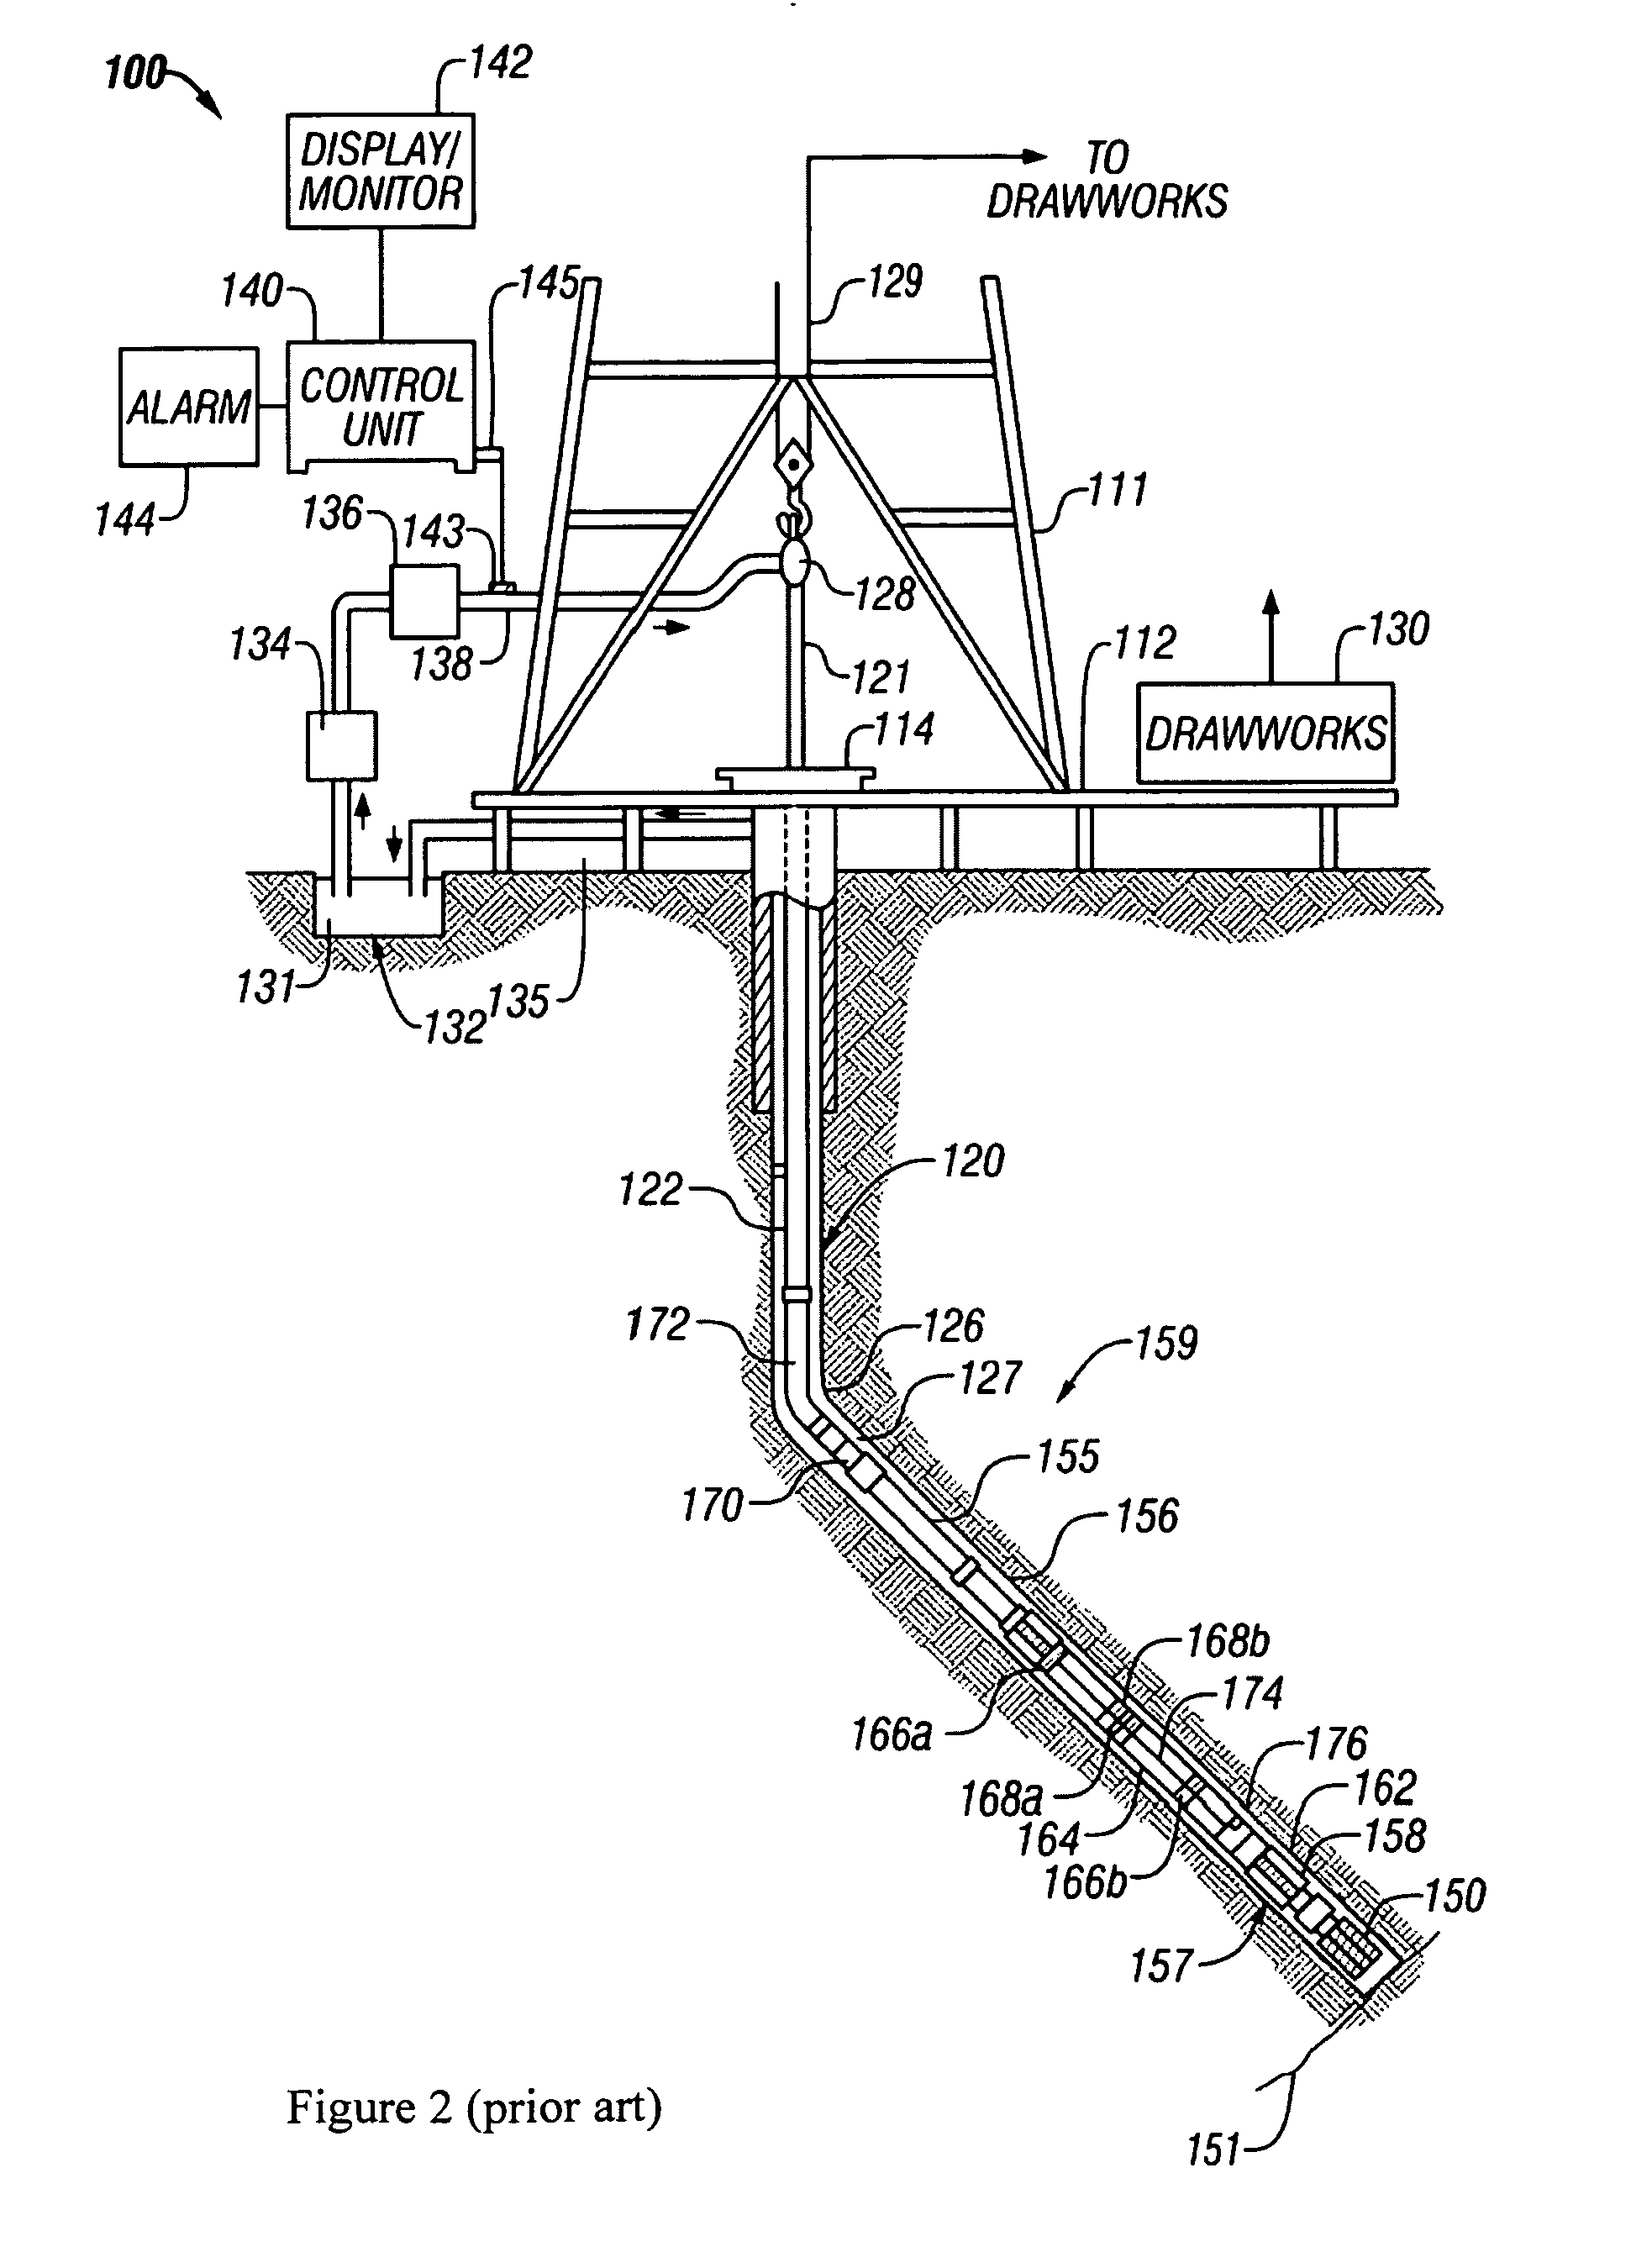 Method and apparatus for detecting overpressured zone ahead of a drill bit using resistivity and seismic measurements